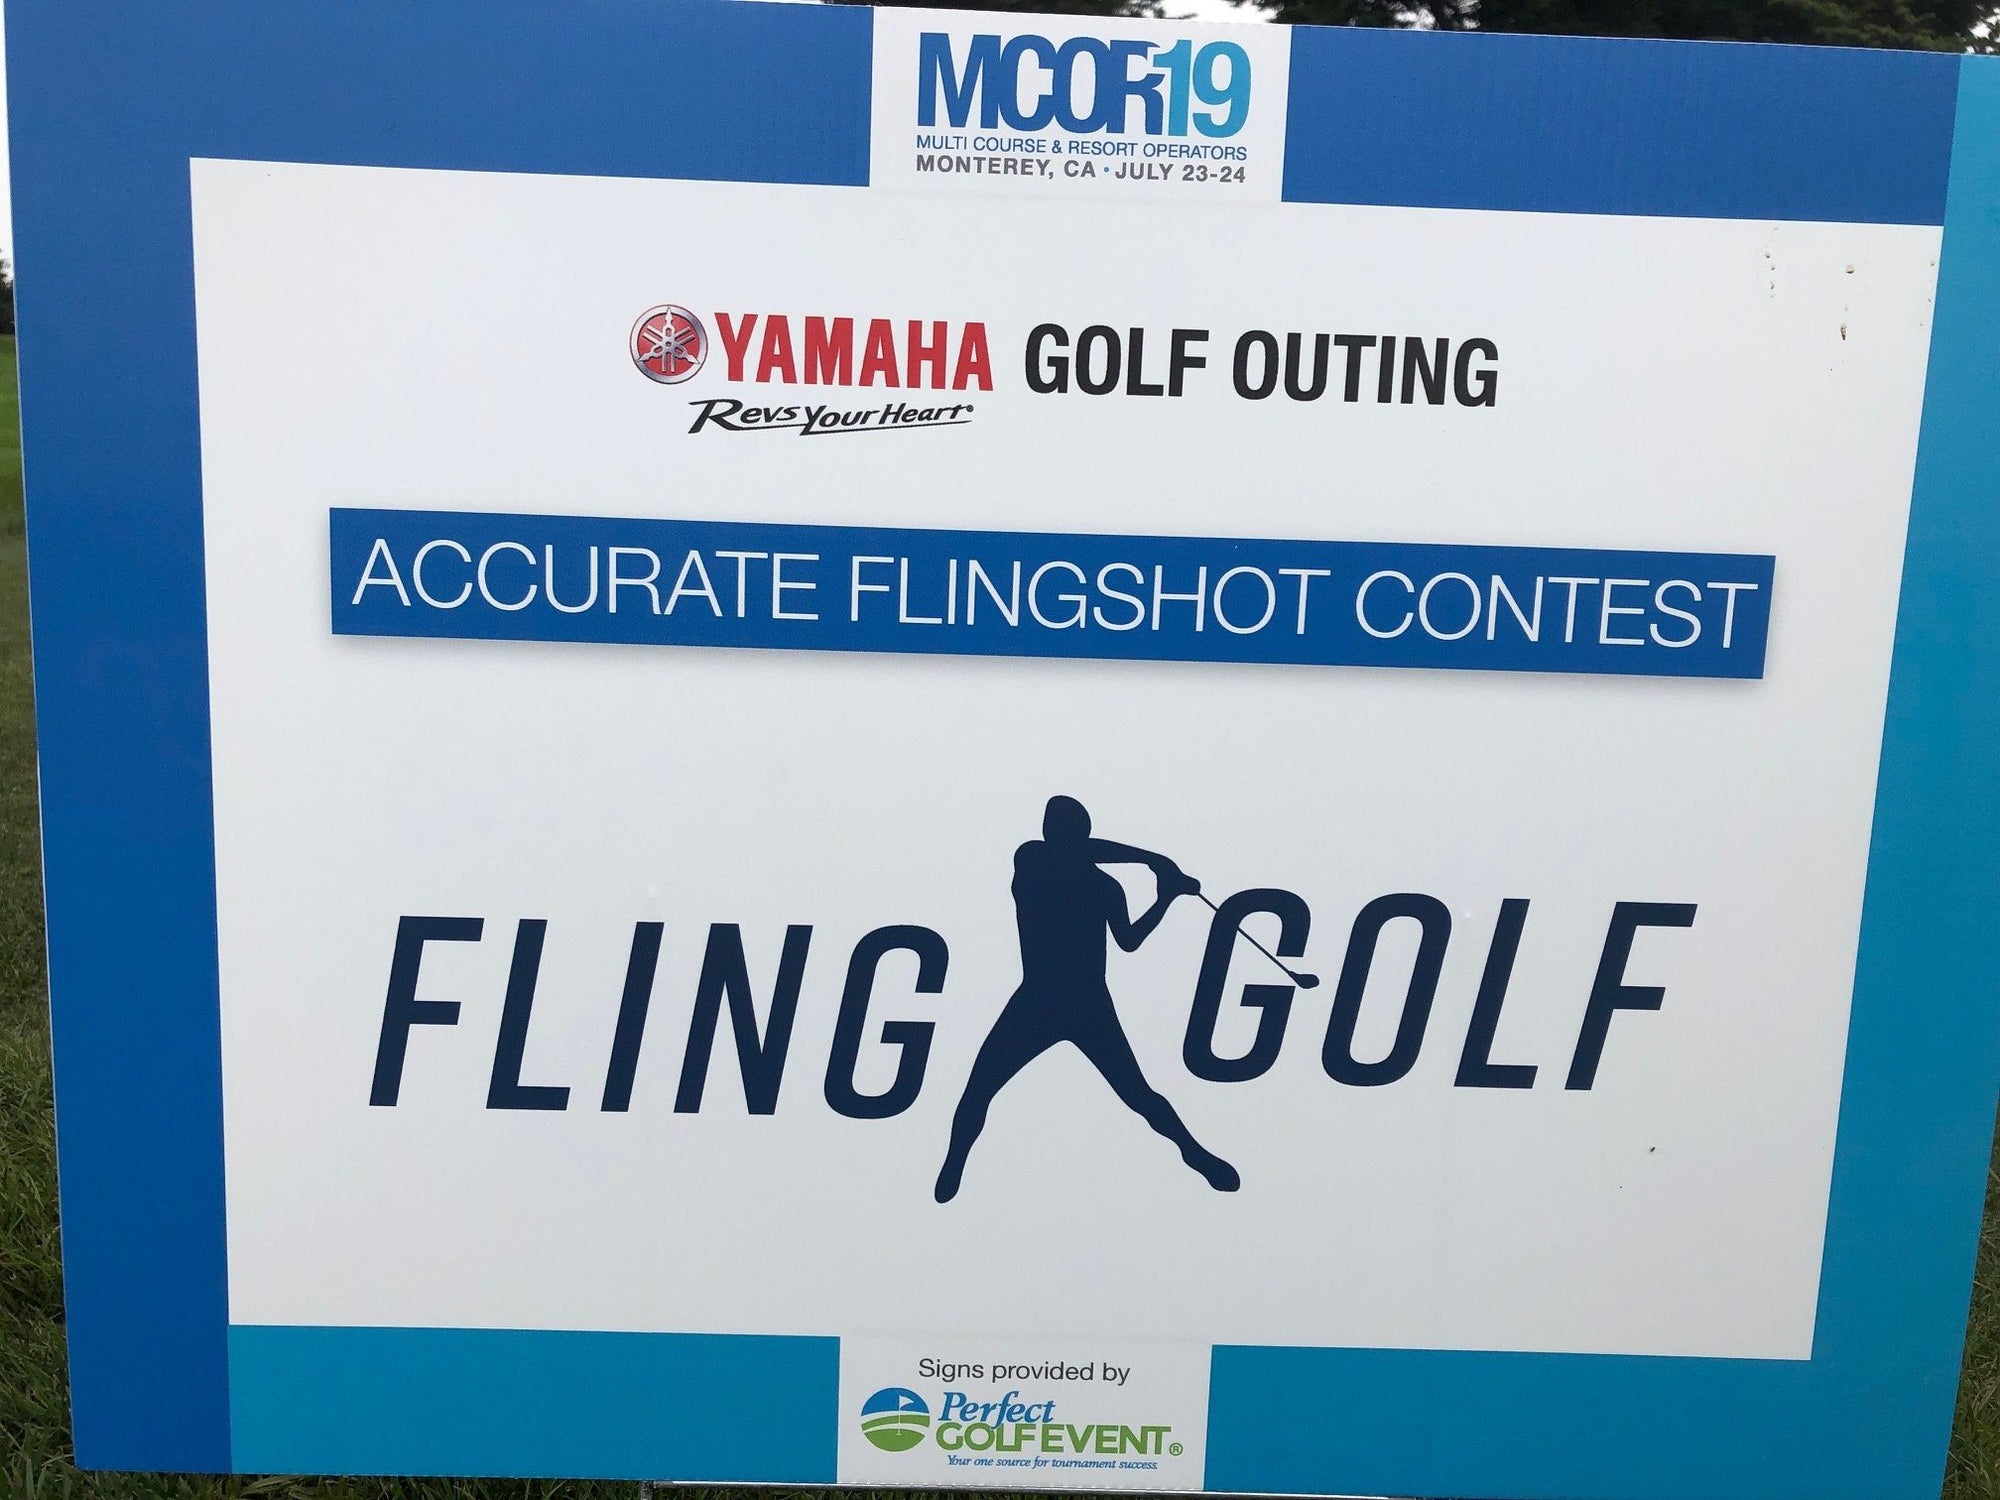 National Golf Course Owners Association features FlingGolf in Monterey